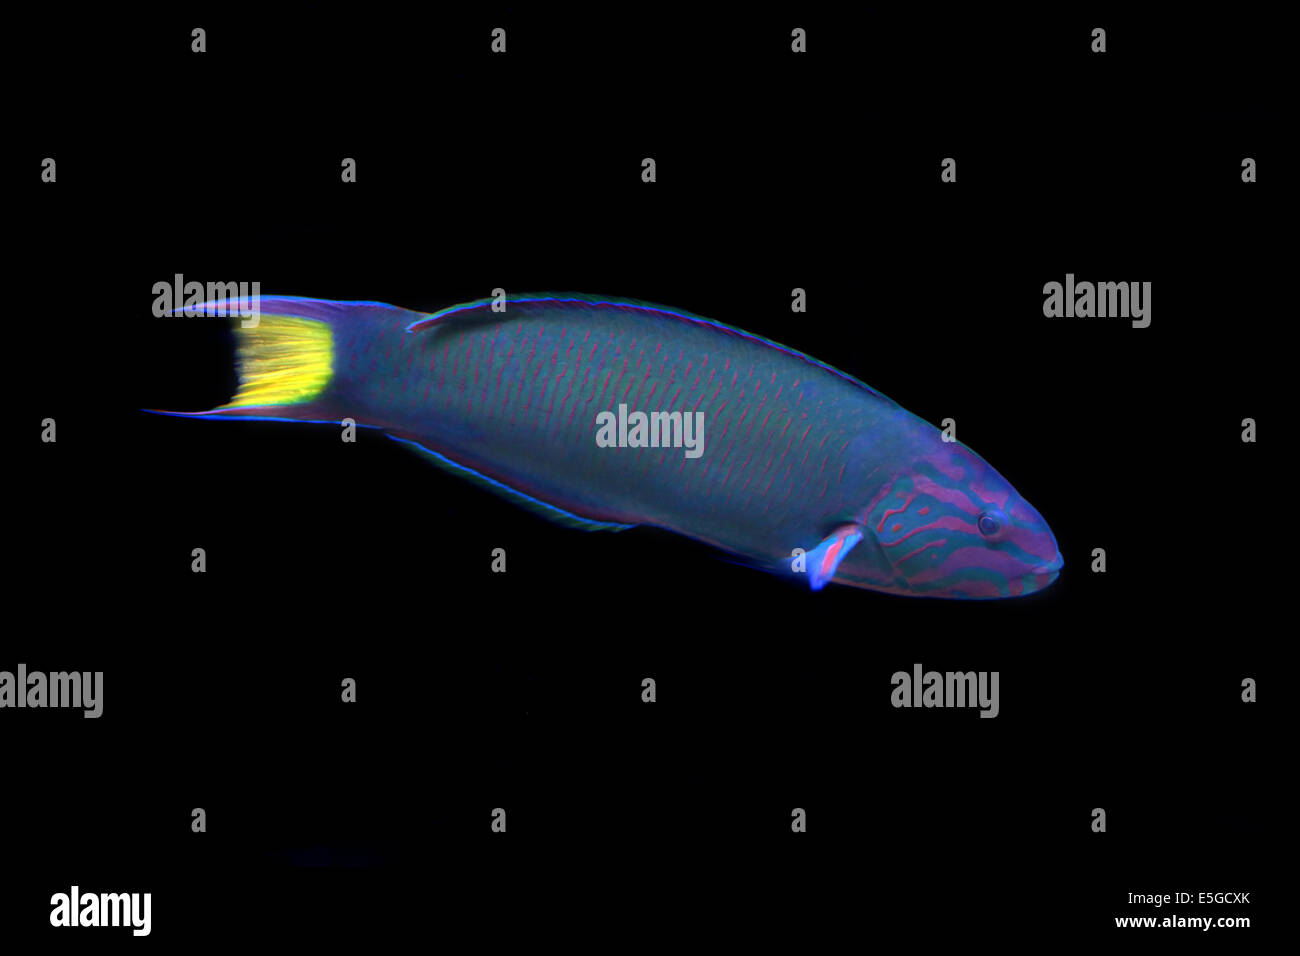 A moon wrasse, Thalassoma lunare, isolated on a black background. This colorful fish can be found on the coral reefs in the Indi Stock Photo